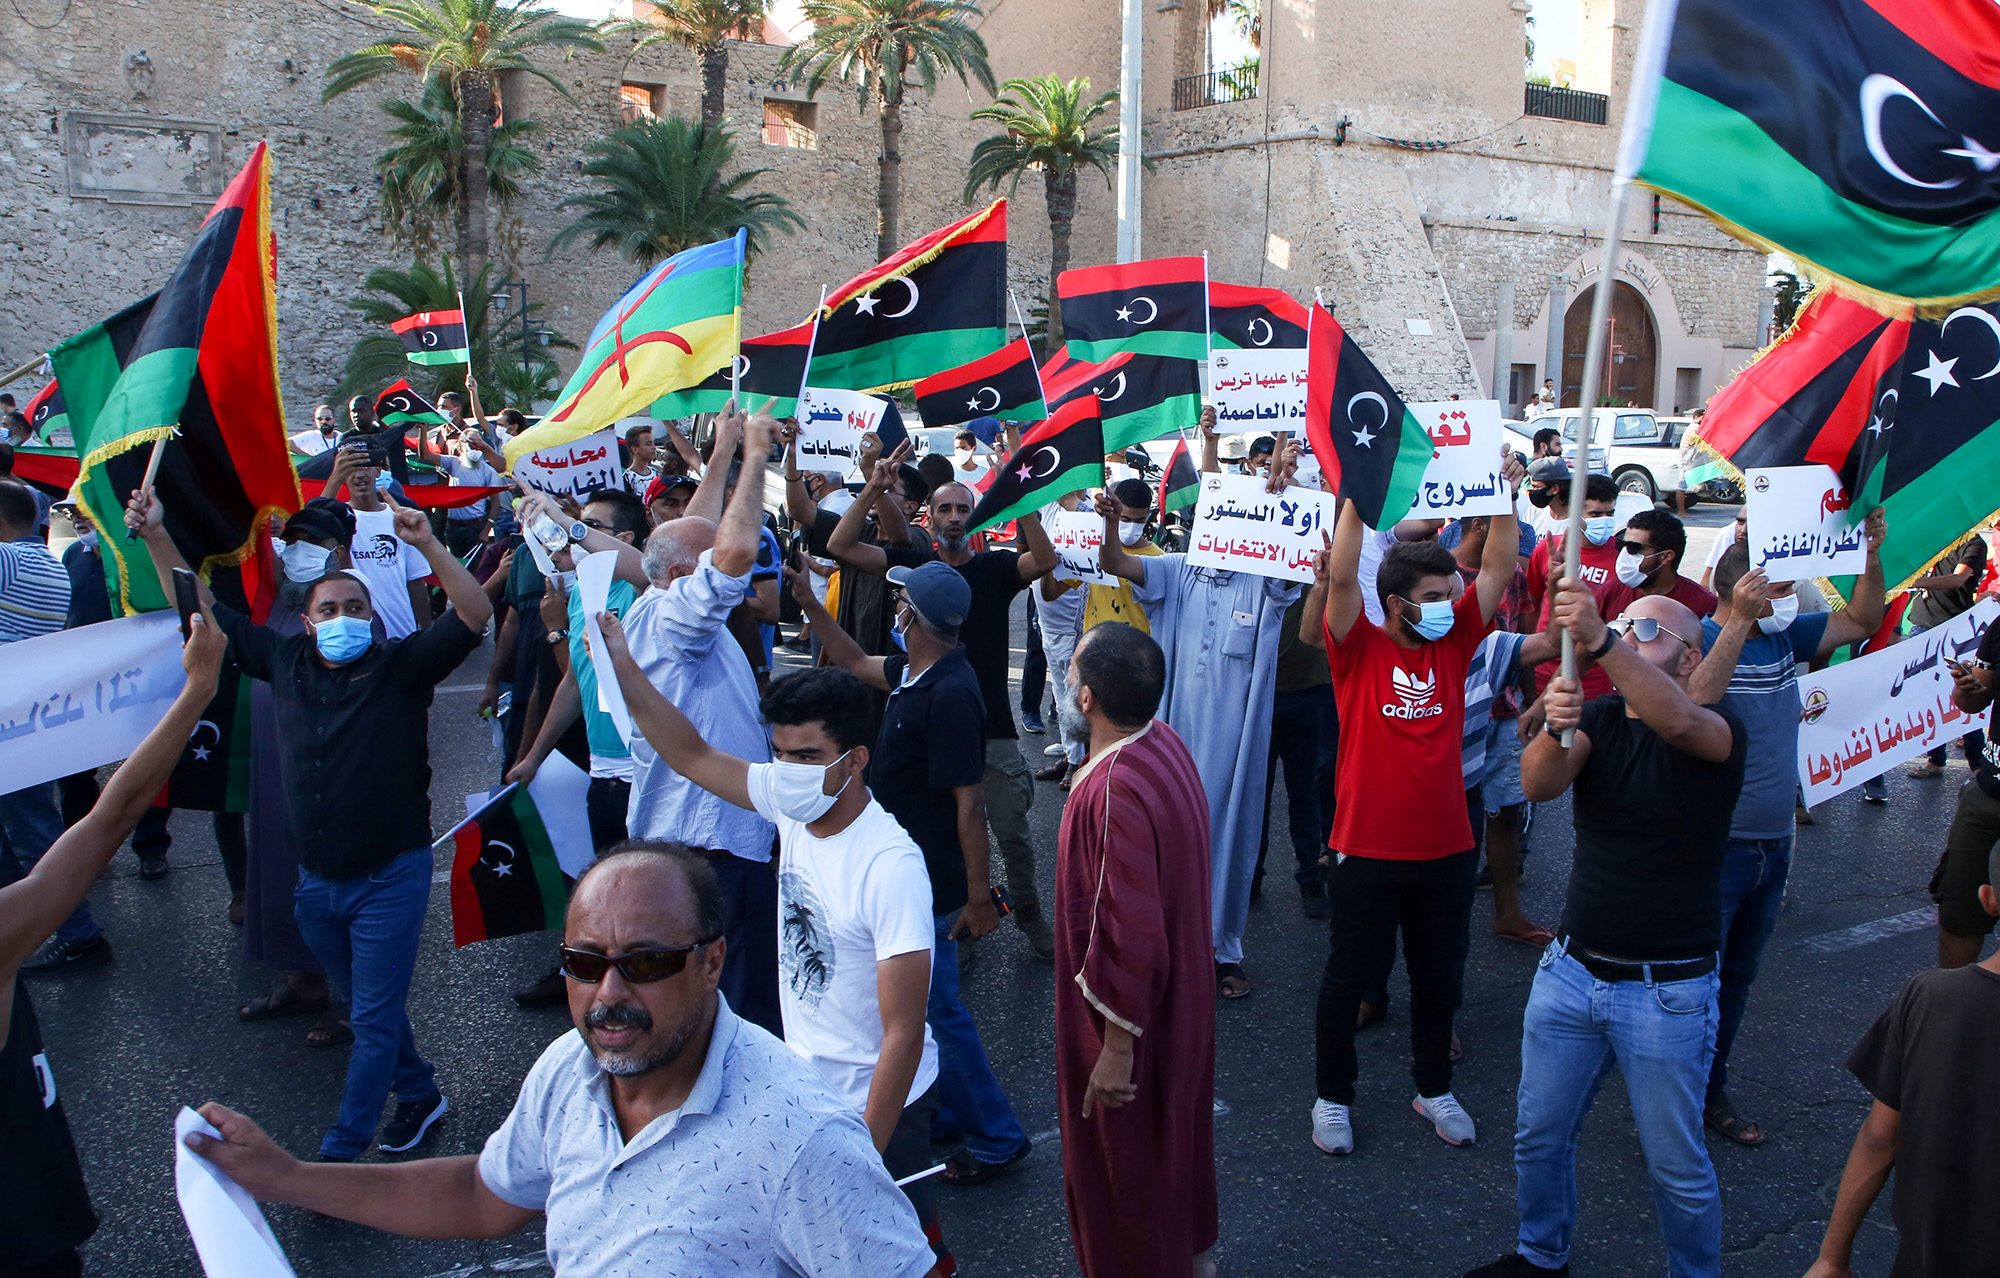 Libyans chant slogans during a demonstration at the Martyrs' Square in Tripoli on Aug. 25.